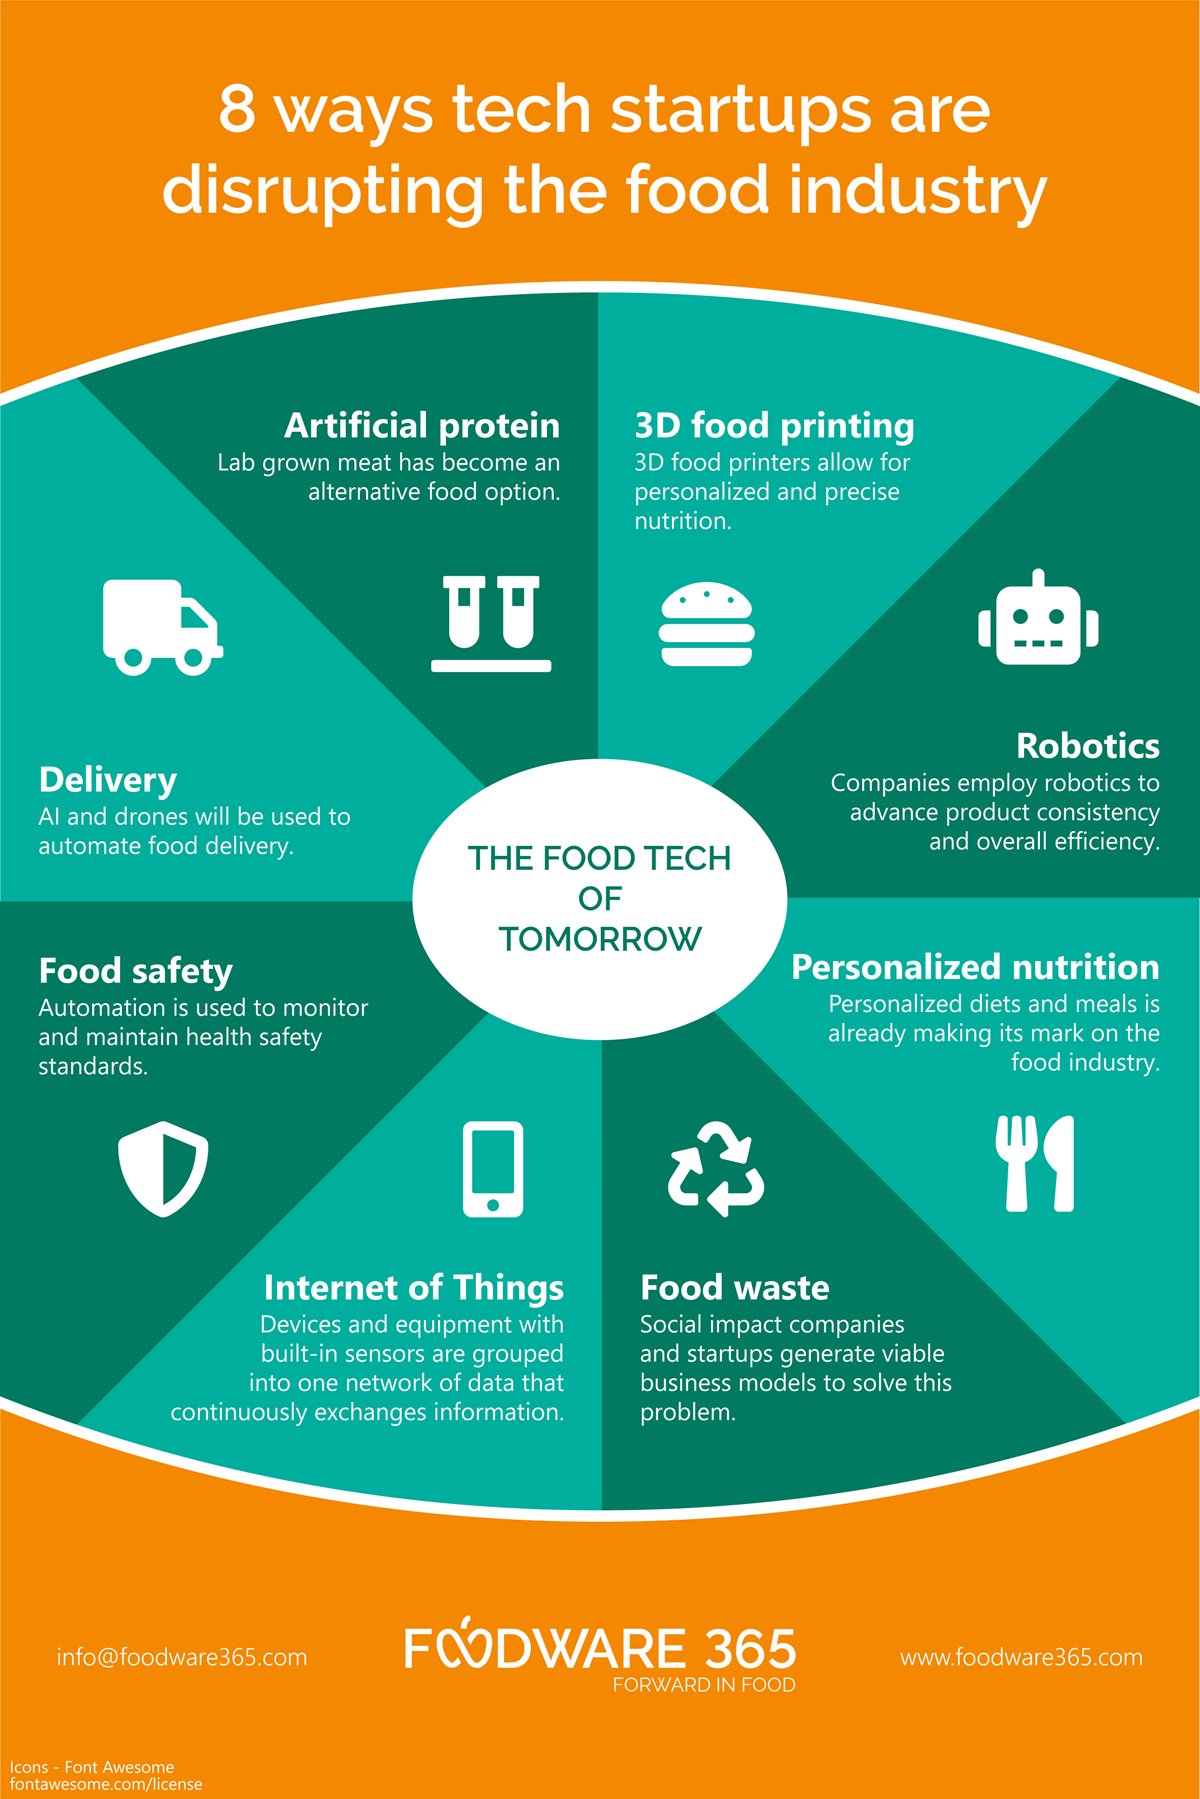 8 ways food tech startups are disrupting the industry